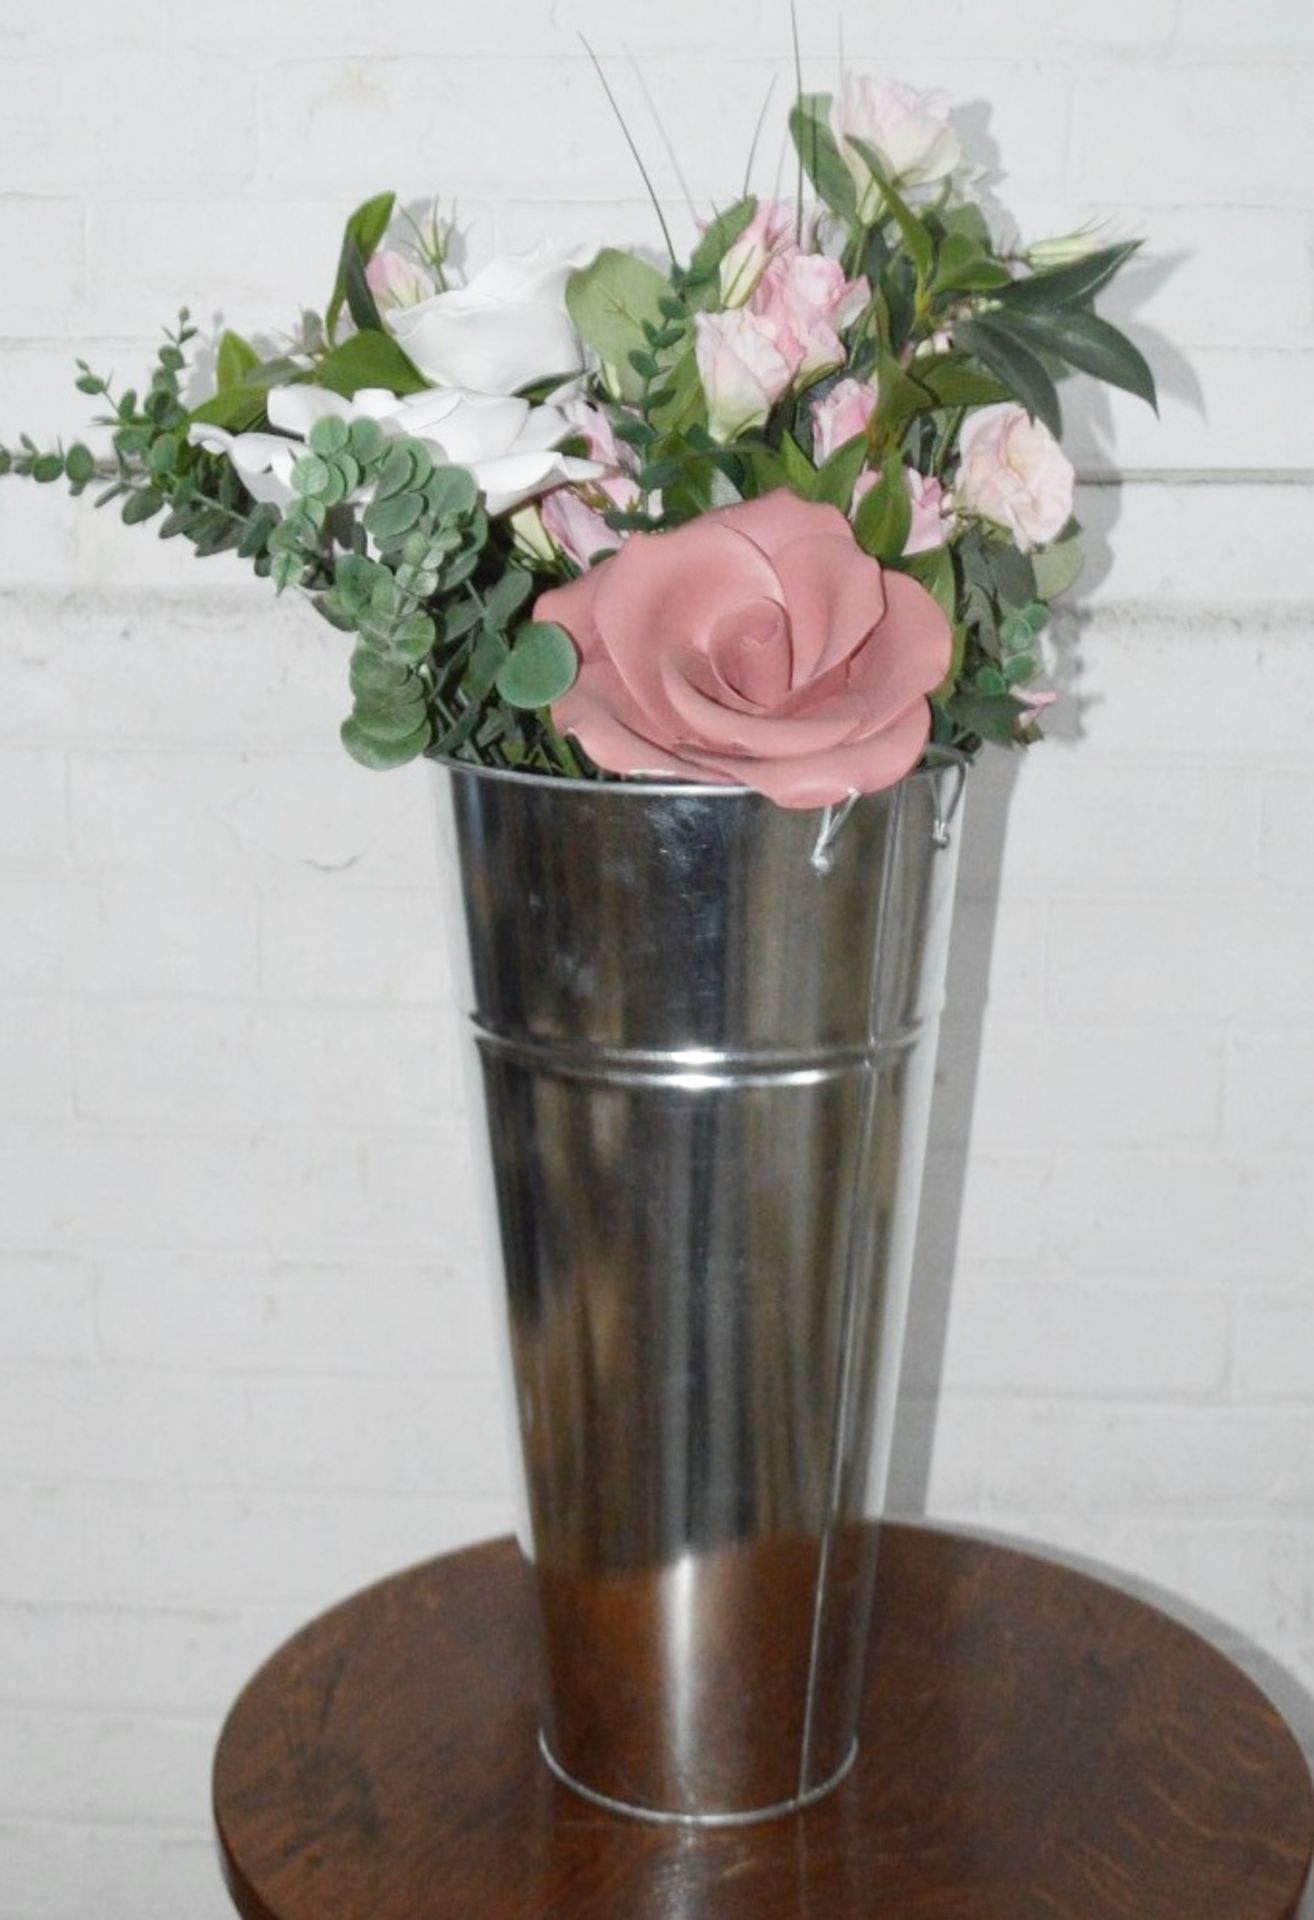 6 x Stunning Commercial Floral Display Bouquets Featuring Handmade Clay Roses and Silk Sprays - Ref: - Image 3 of 13